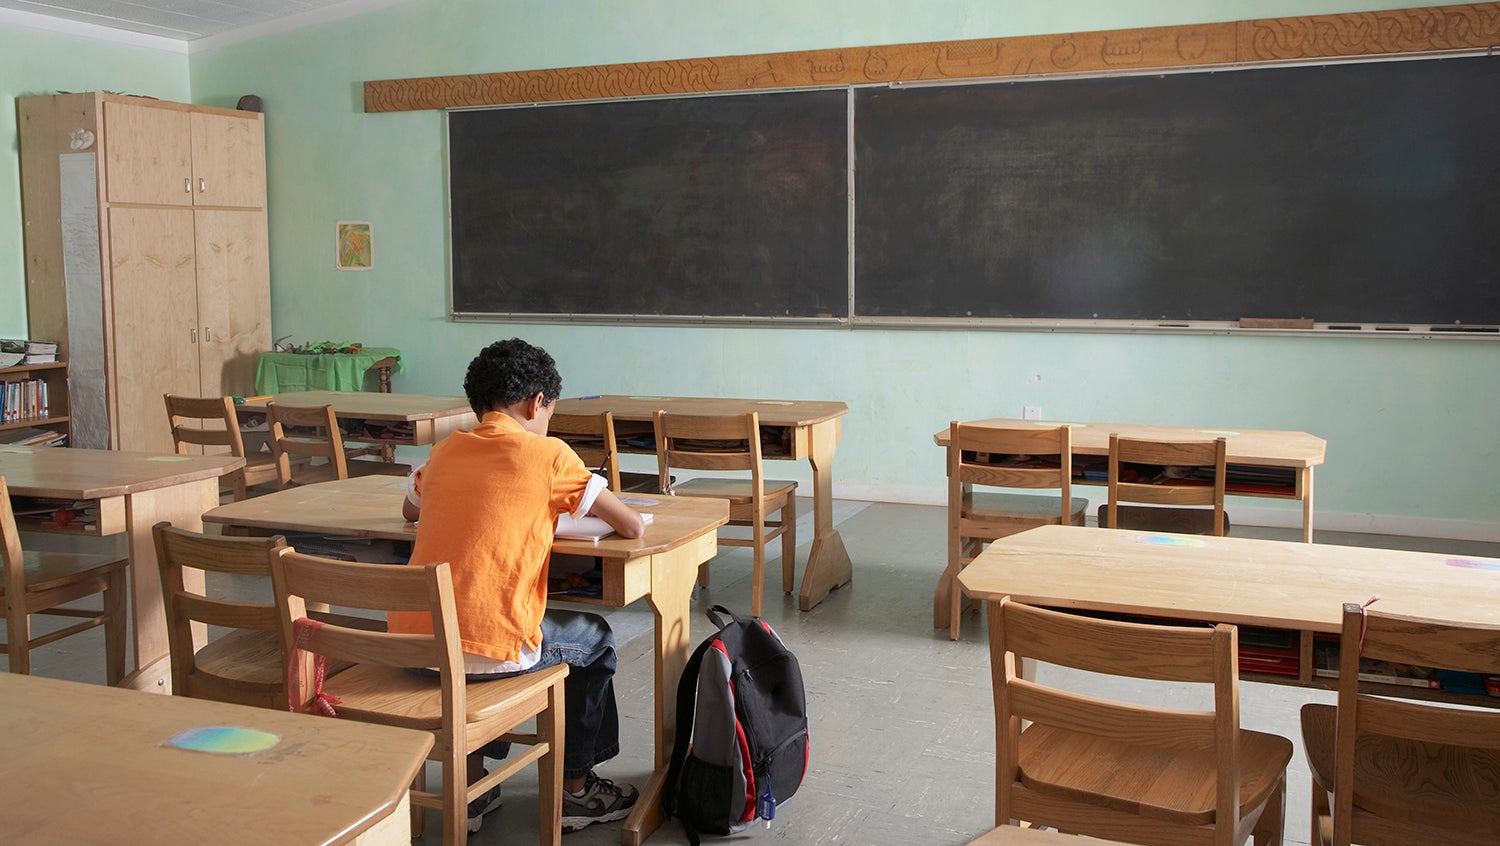 View from back of classroom of young boy sitting at a desk in the empty classroom